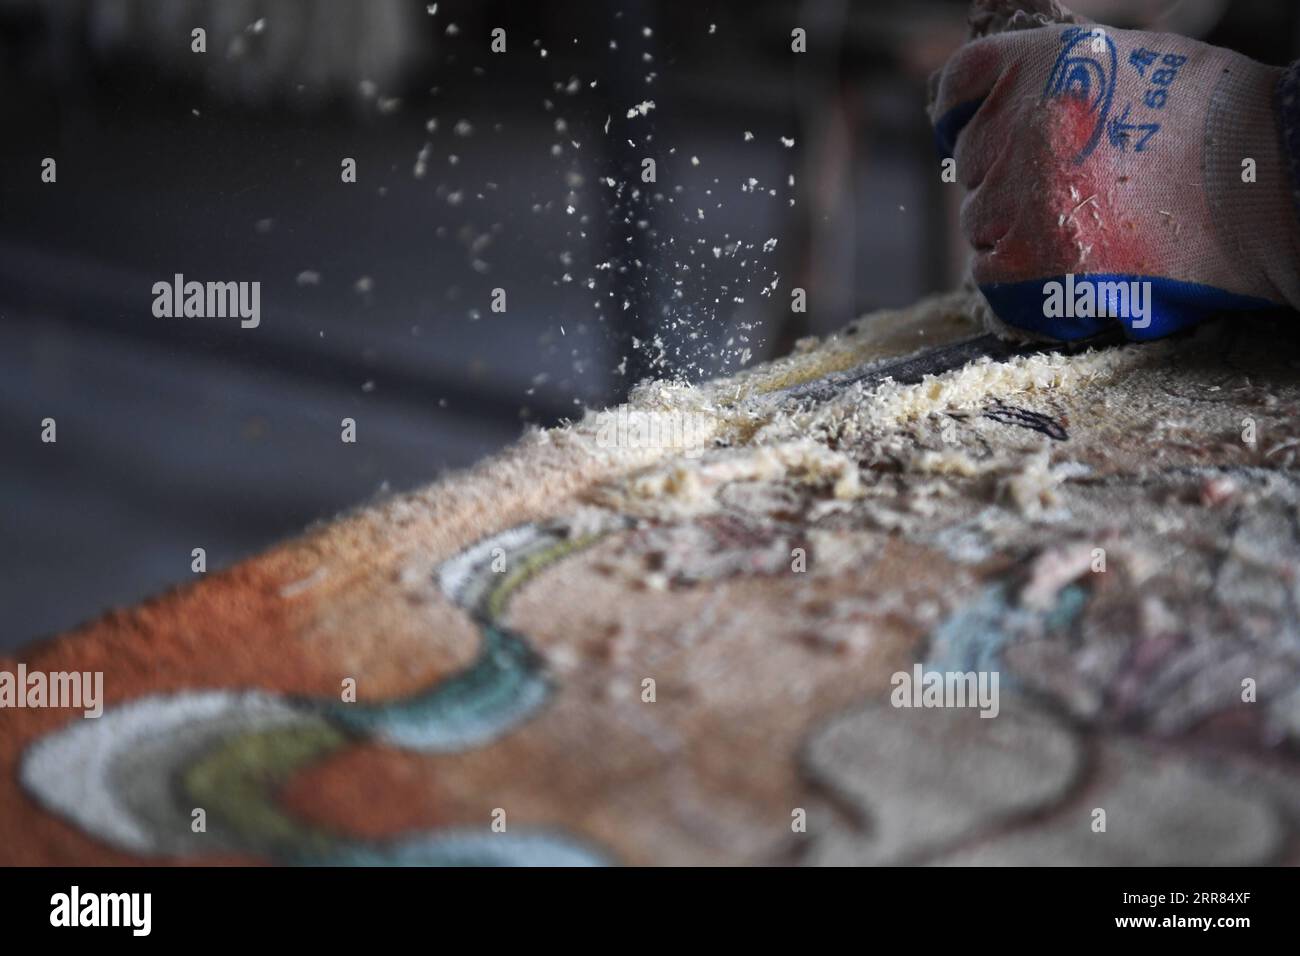 210418 -- TIANSHUI, April 18, 2021 -- A worker flattens a silk carpet in Xintian Silk Carpet Company in Tianshui City, northwest China s Gansu Province, April 12, 2021. The city of Tianshui in northwest China s Gansu Province has a long tradition of making silk carpets. The technique, which involves more than 20 procedures, was listed as a national intangible cultural heritage in 2014 due to its artistic value and complexity. Huang Jingrong, 49, embarked on her journey of making silk tapestries at the age of 18 in Xintian Silk Carpet Company. Since the first day, she never shied away from the Stock Photo